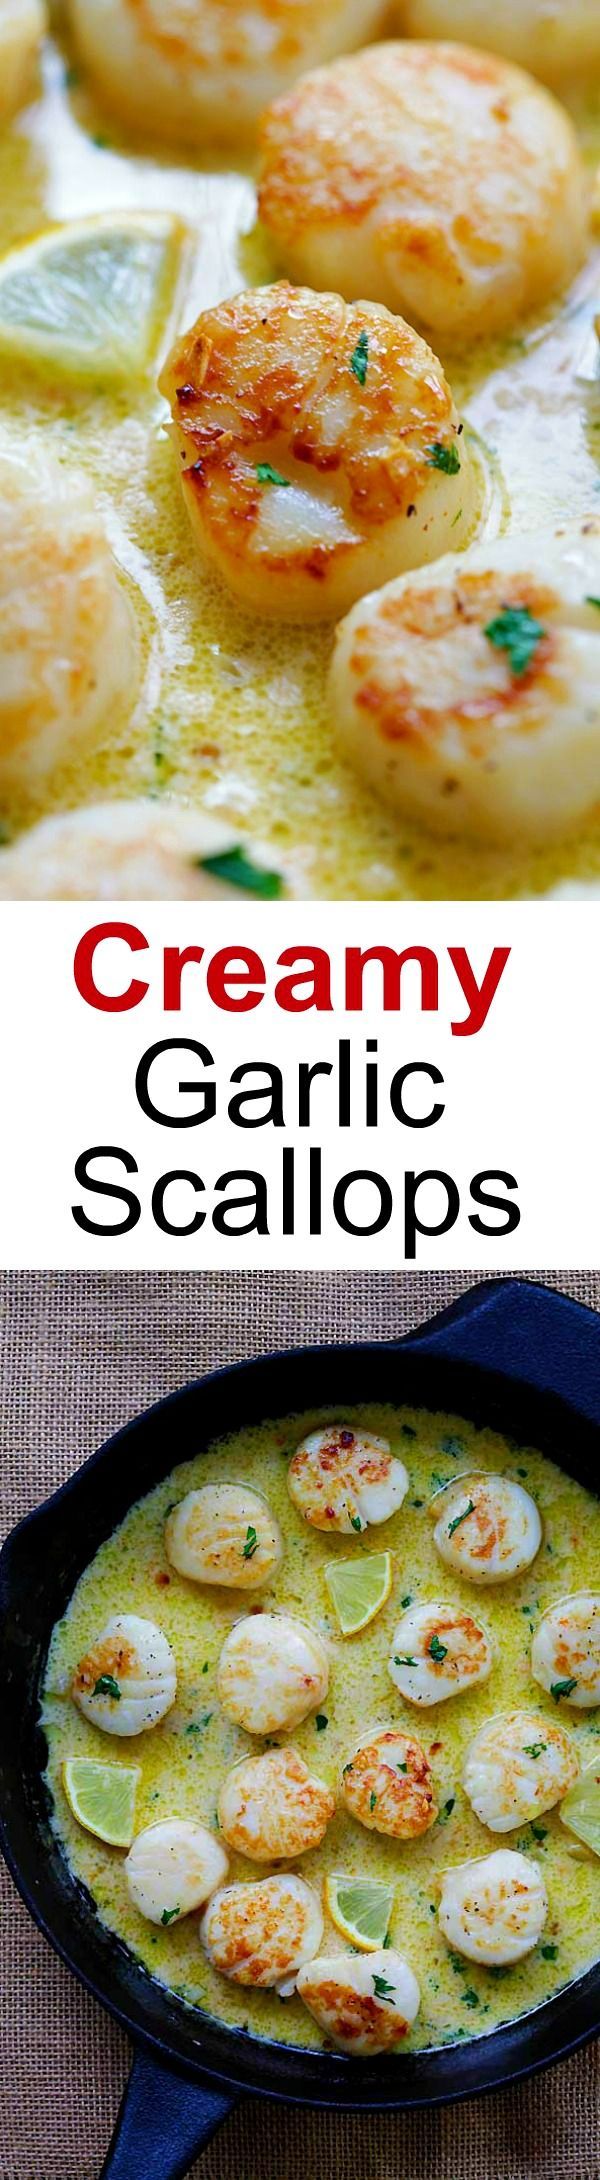 Creamy Garlic Scallops – easiest, creamiest and best scallop recipe ever. Takes